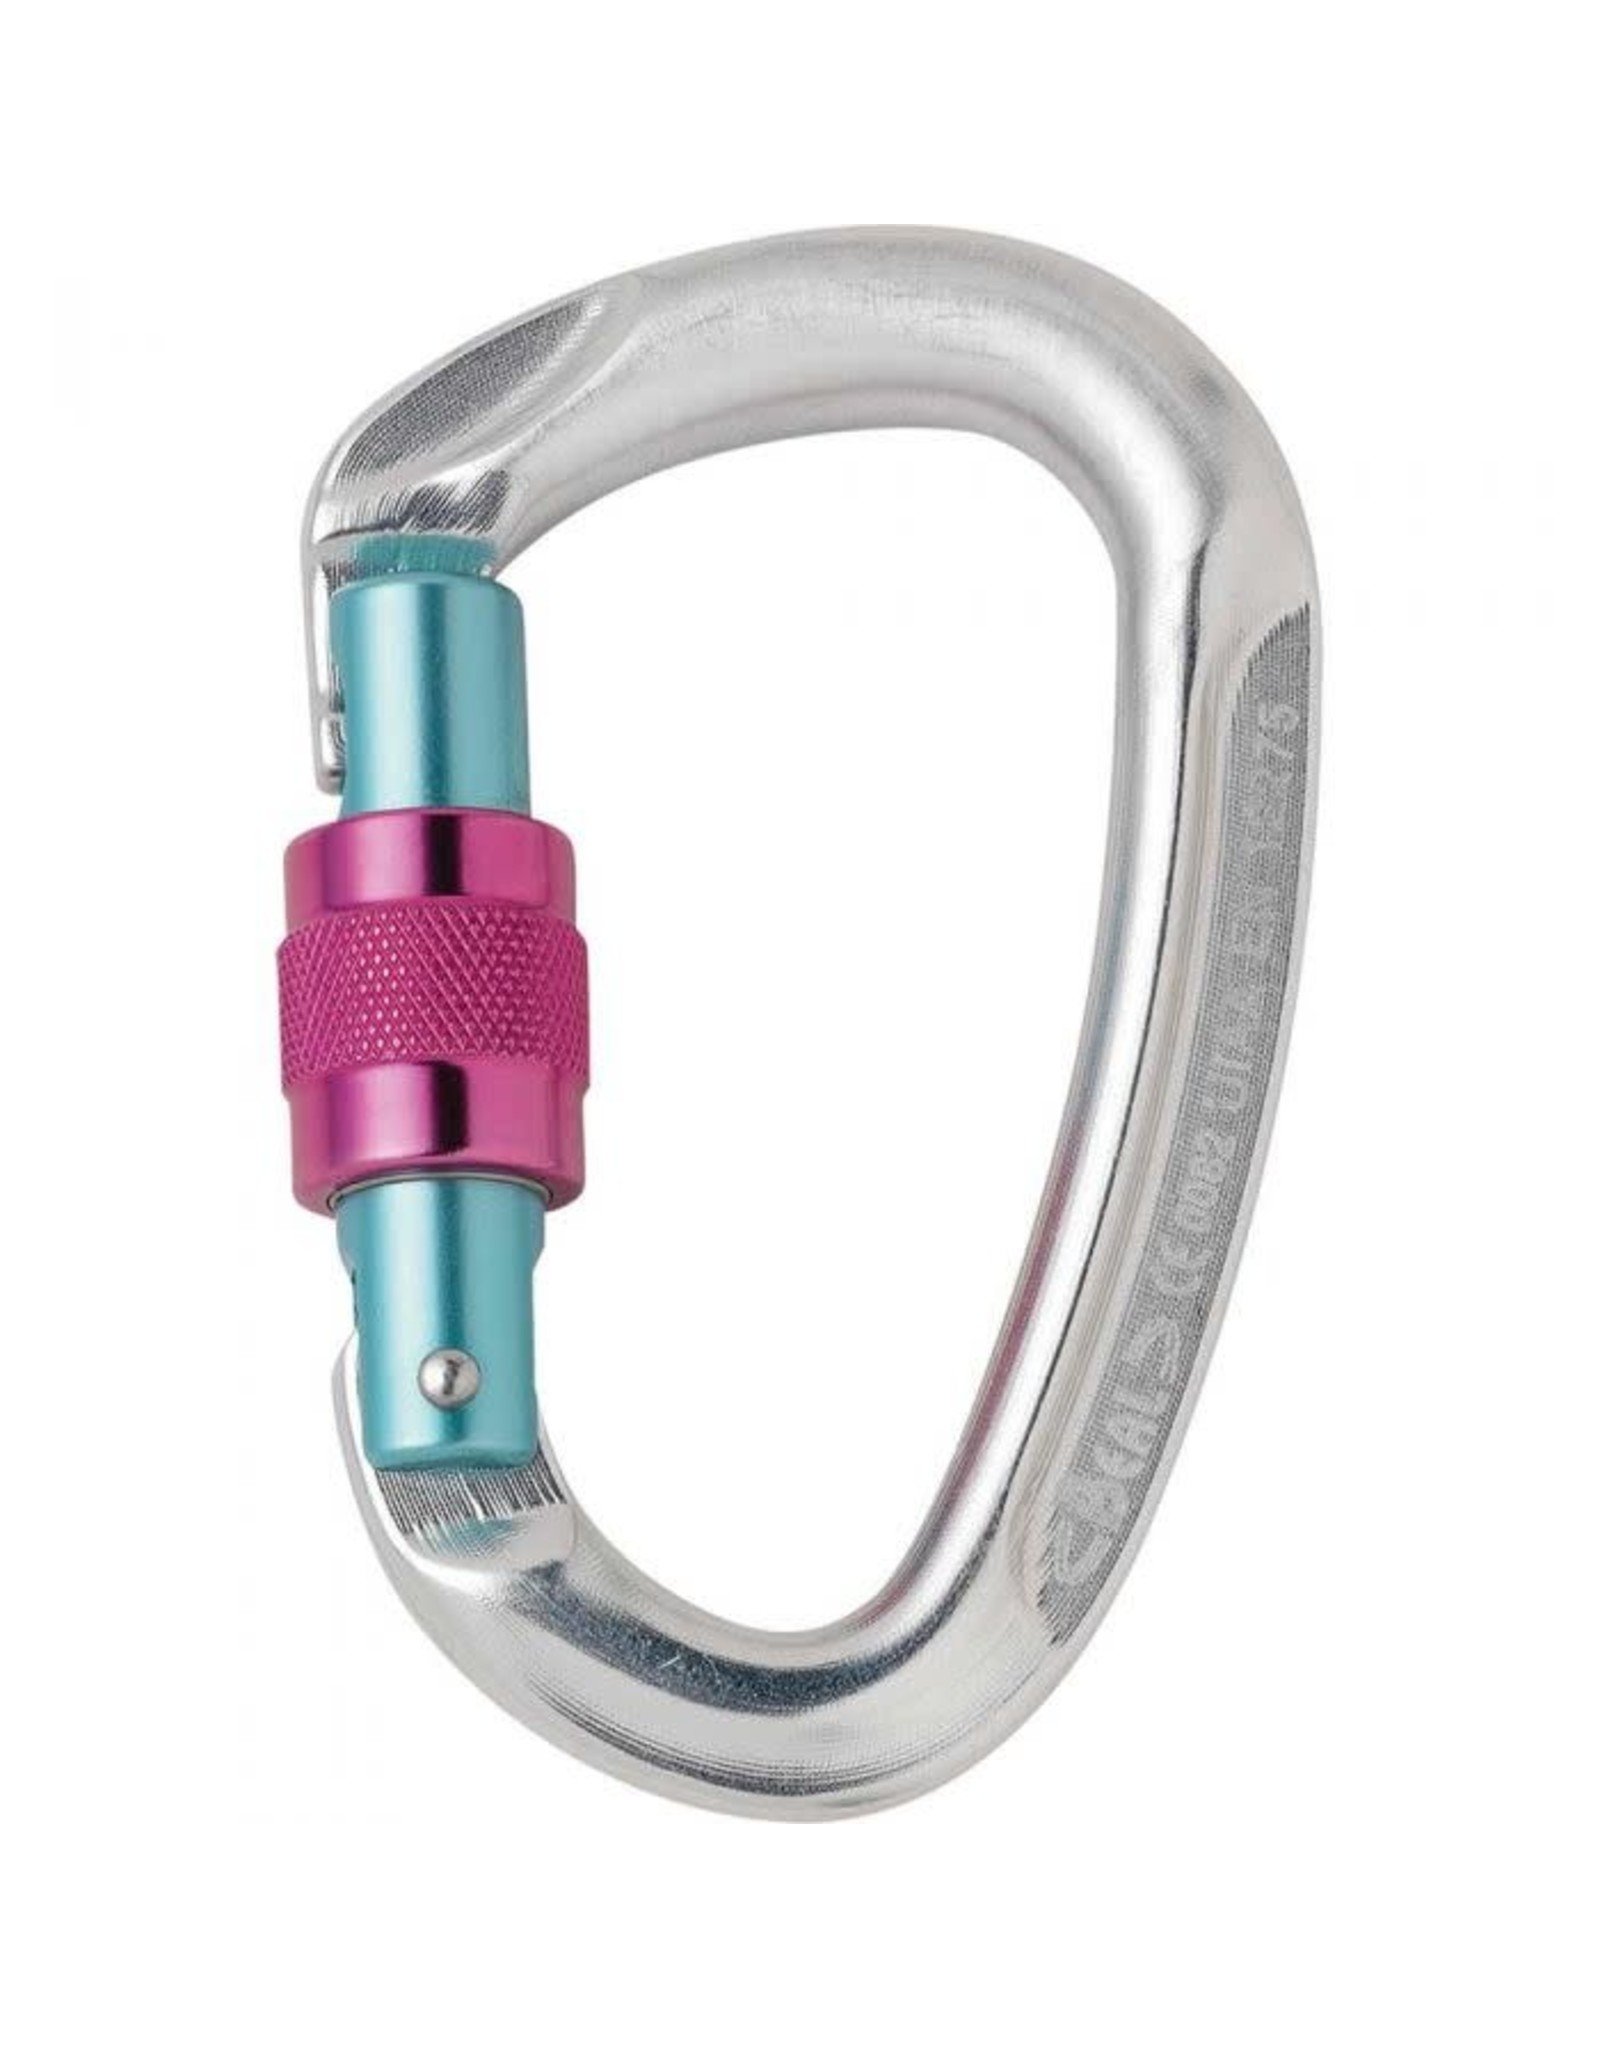 BE ONE SG BELAY CARABINER-F